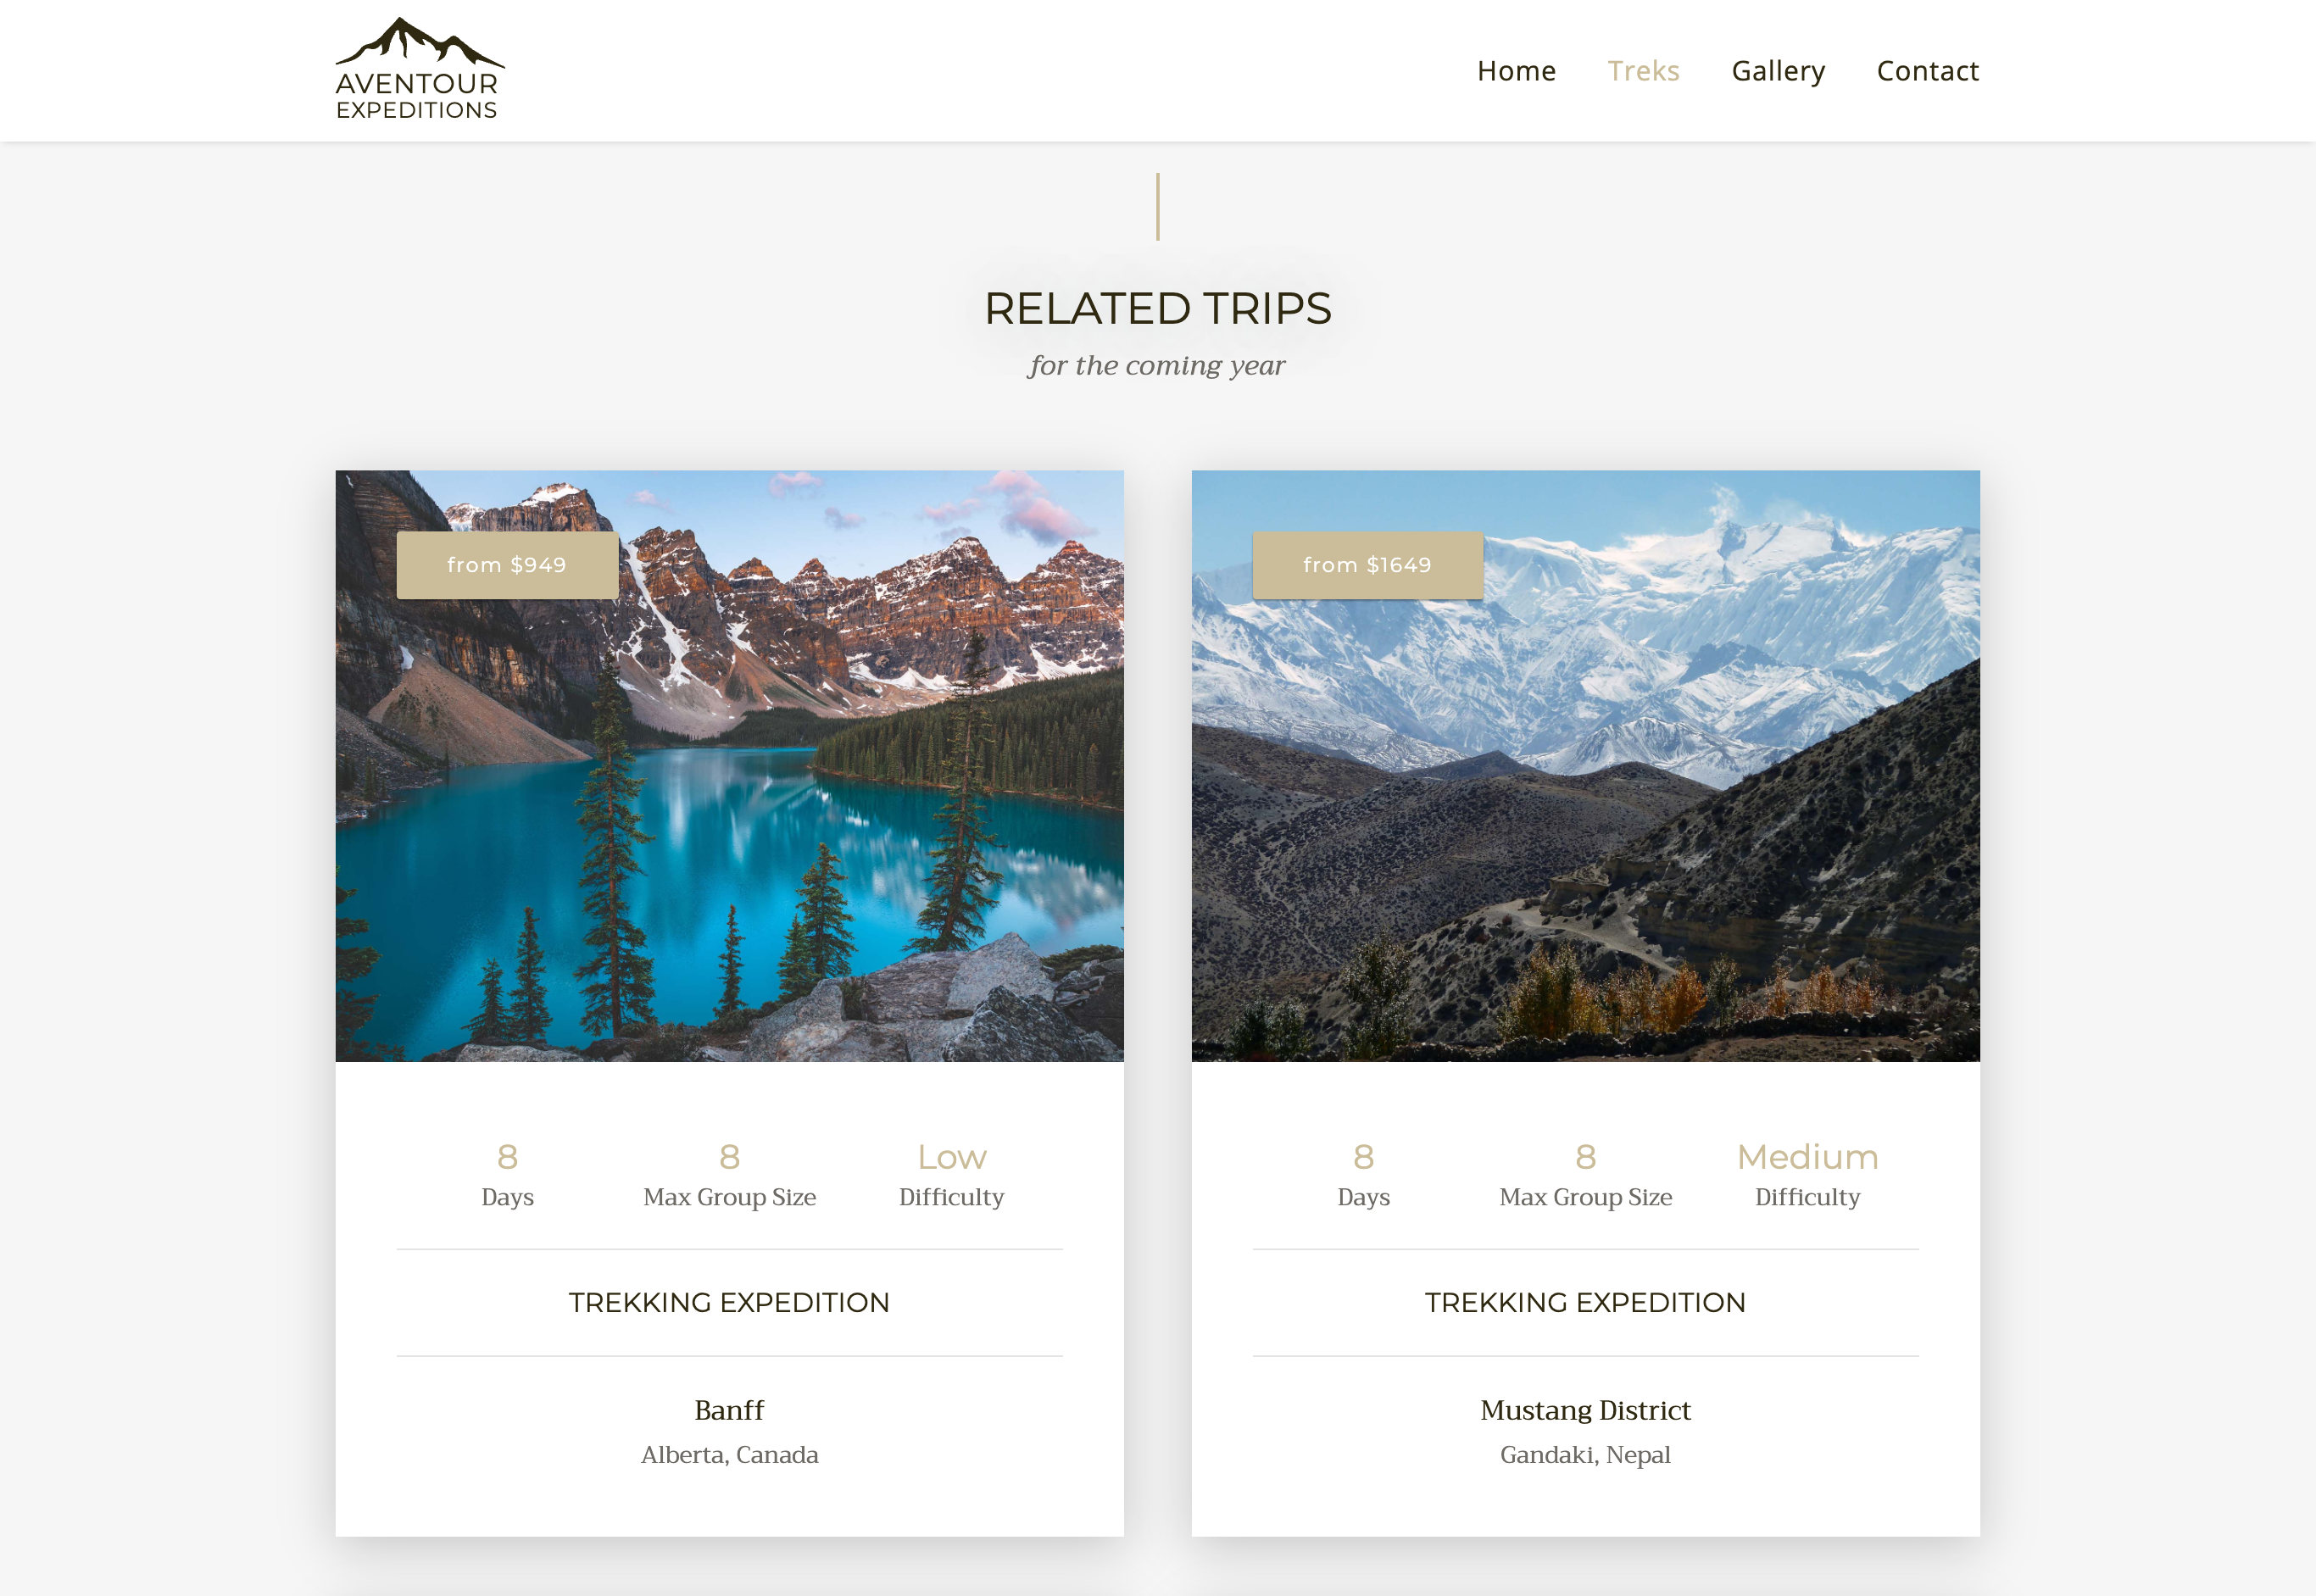 Page showing related treks to mountain destinations in Canada and Nepal